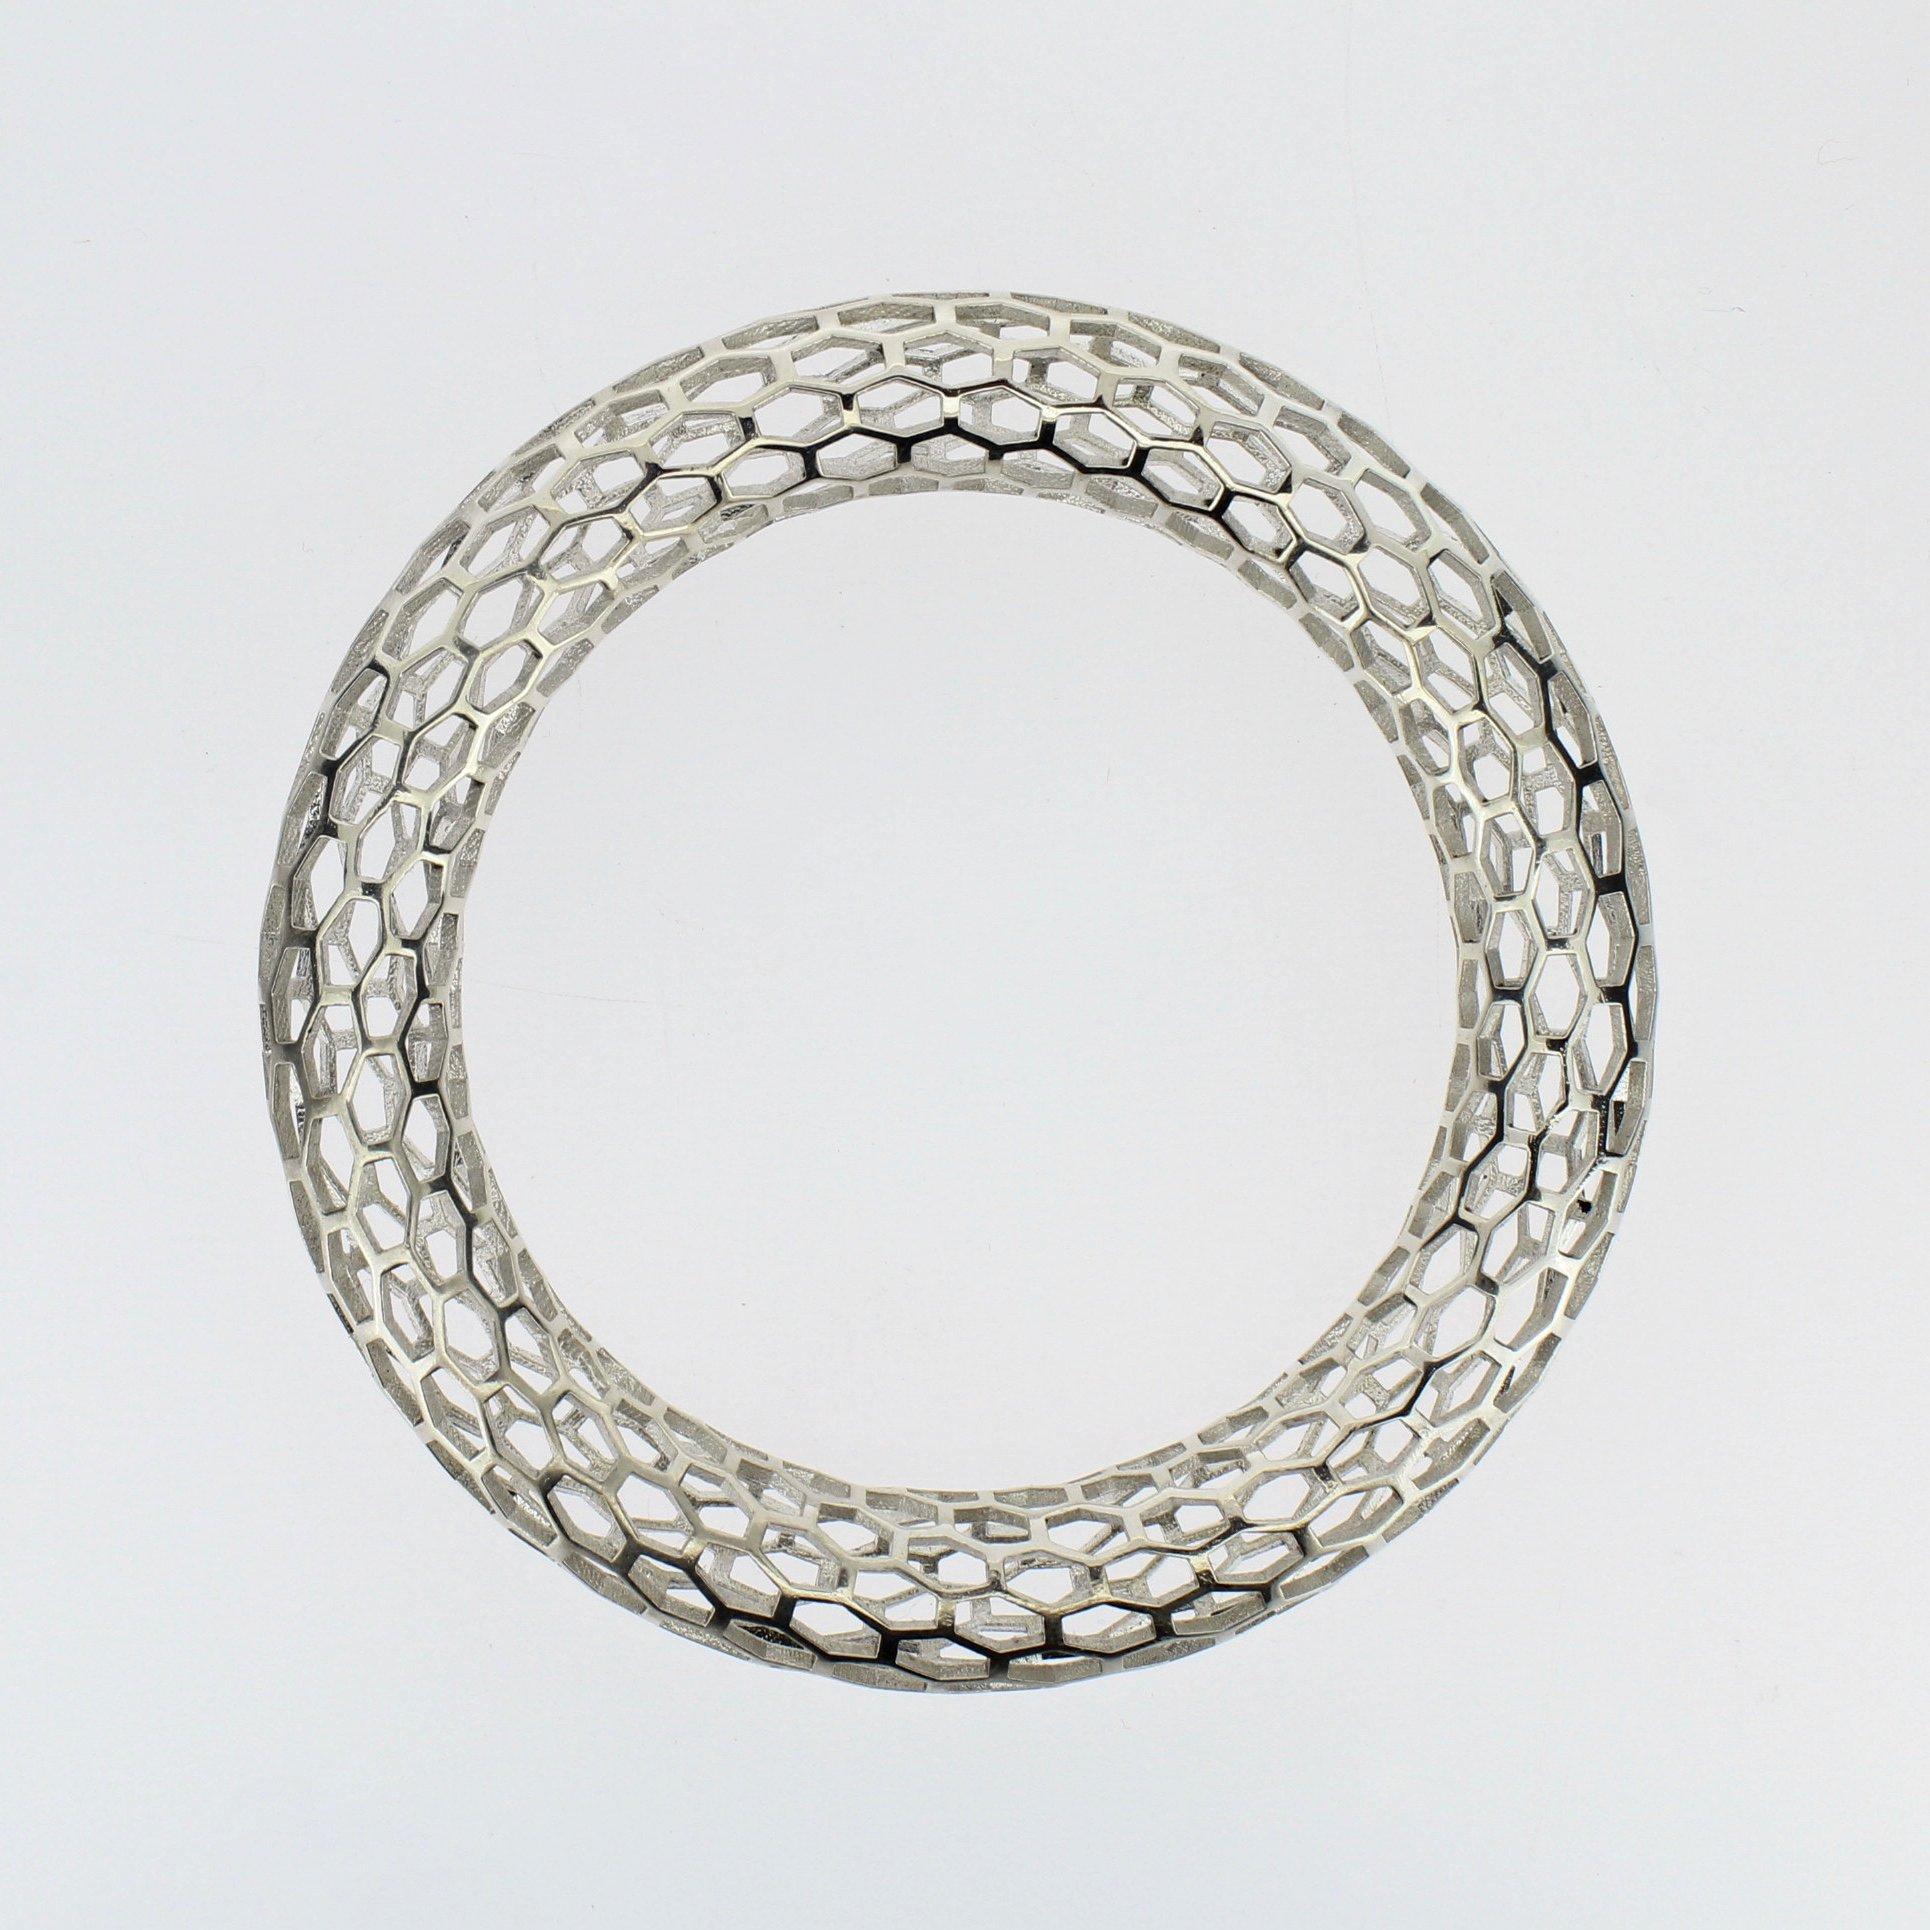 The islet narrow bracelet is a Doug Bucci's production-line wearable from his long-standing Islet series of 3D printed jewelry. 

Doug Bucci is a leading-edge Technology-Age American jewelry designer based in Philadelphia, Pennsylvania.

This